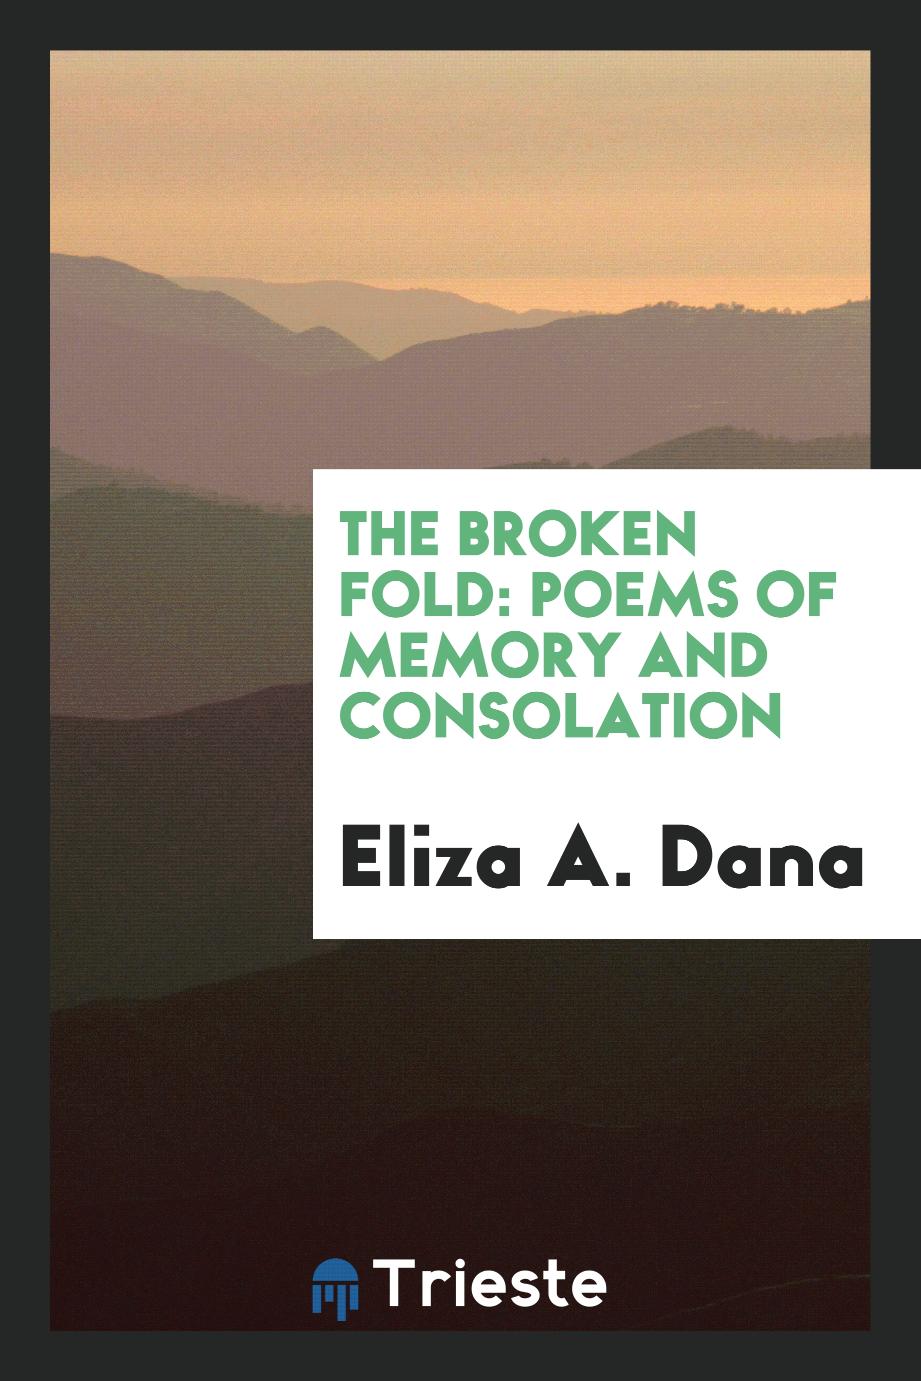 The Broken Fold: Poems of Memory and Consolation